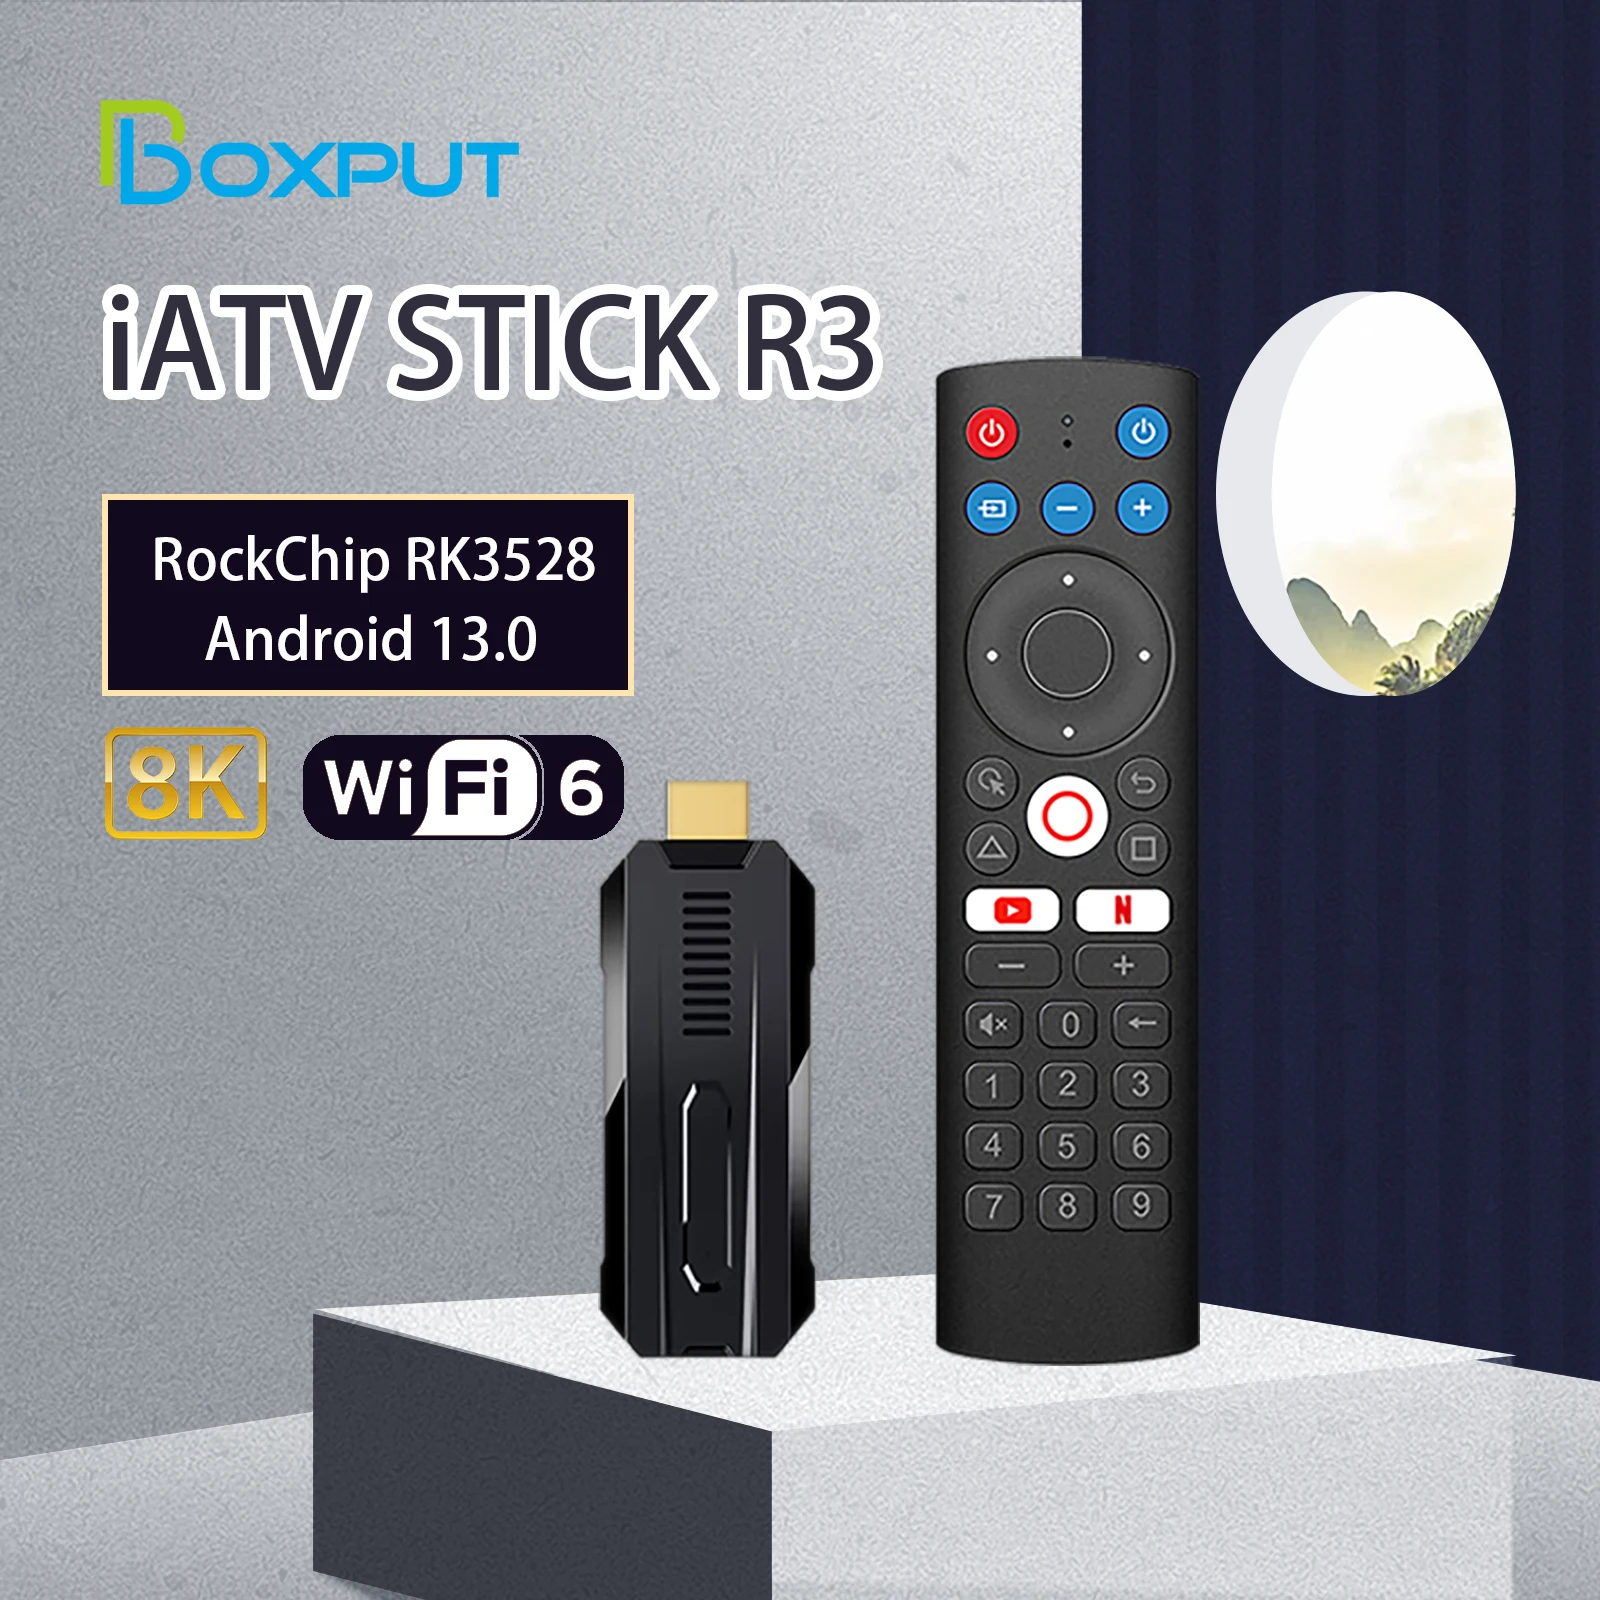 BOXPUT Android 13.0 iATV R3 Fire TV Stick RockChip RK3528 8K Portable TVbox 2.4G/5G WiFi6 BT5.0 OTG TF Slot With Screencasting tvstick iatv q3 tv stick fire 2gb 16gb android10 0 stick with bt voice remote support 5g wifi bt ip tv streaming media player